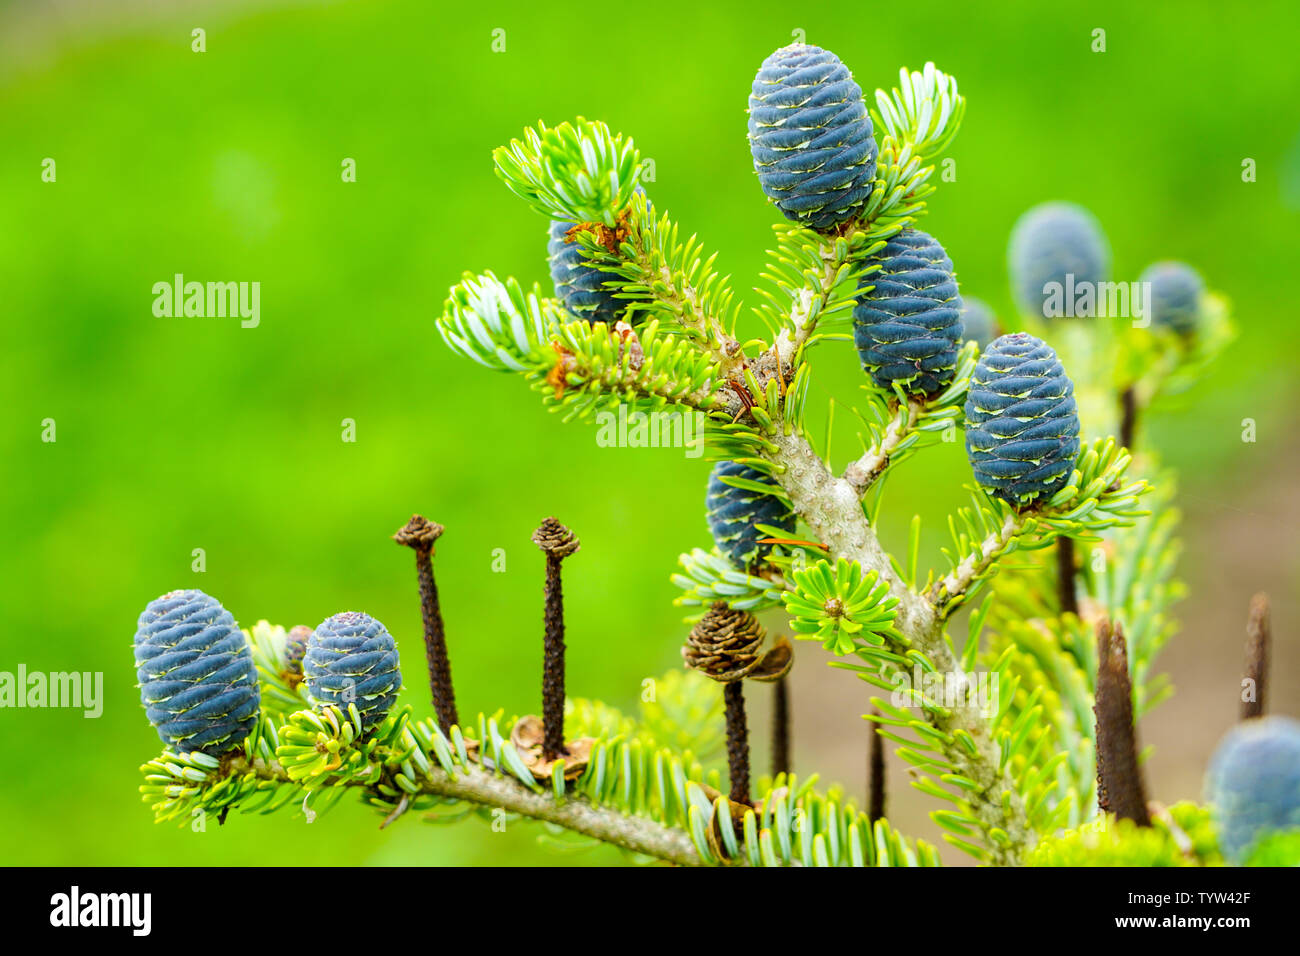 Closeup view of the Korean fir cones on the green branches Stock Photo